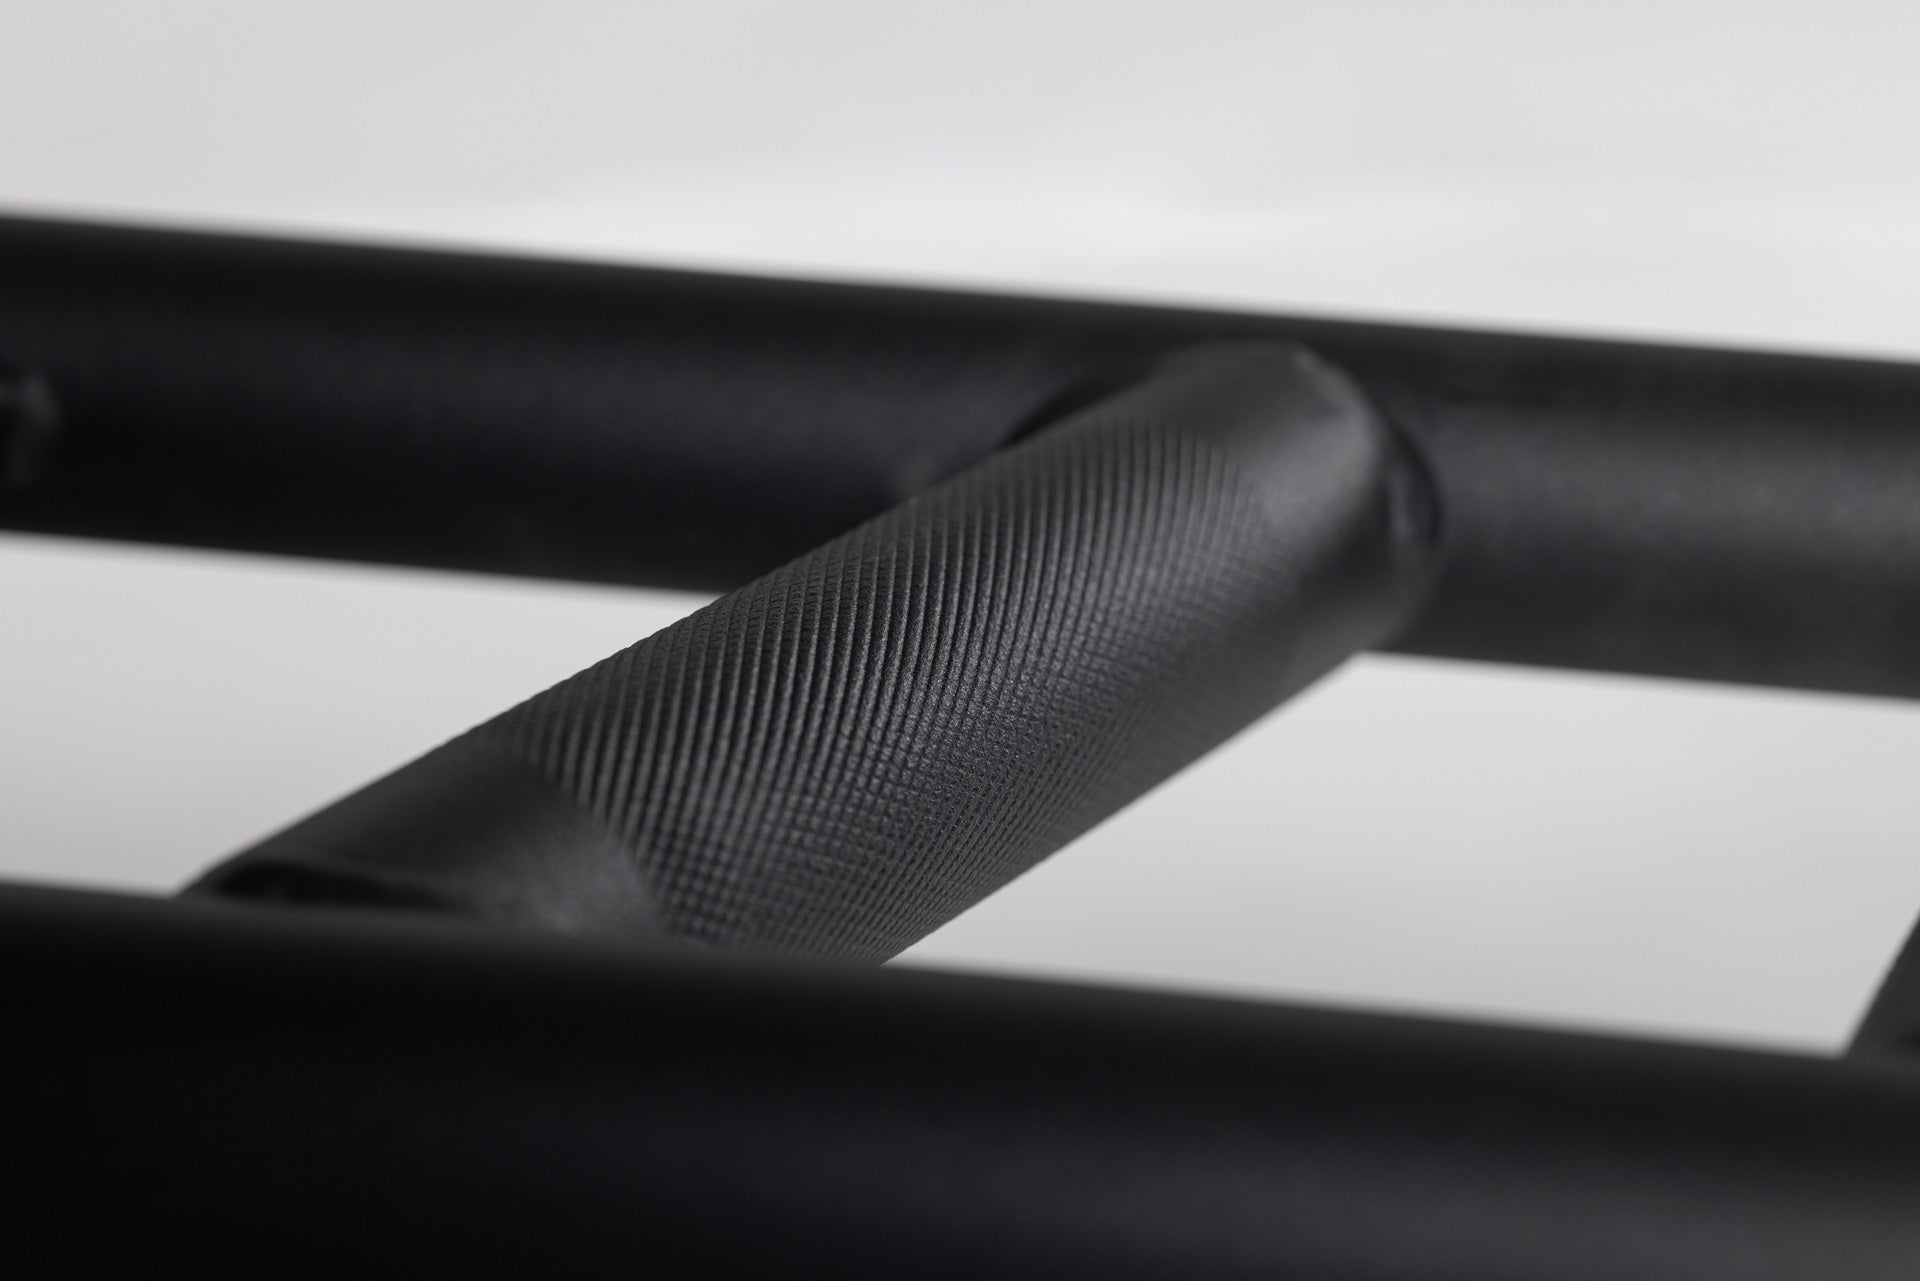 Cambered Swiss Bar knurled handle for the right amount of grip without being too aggressive.